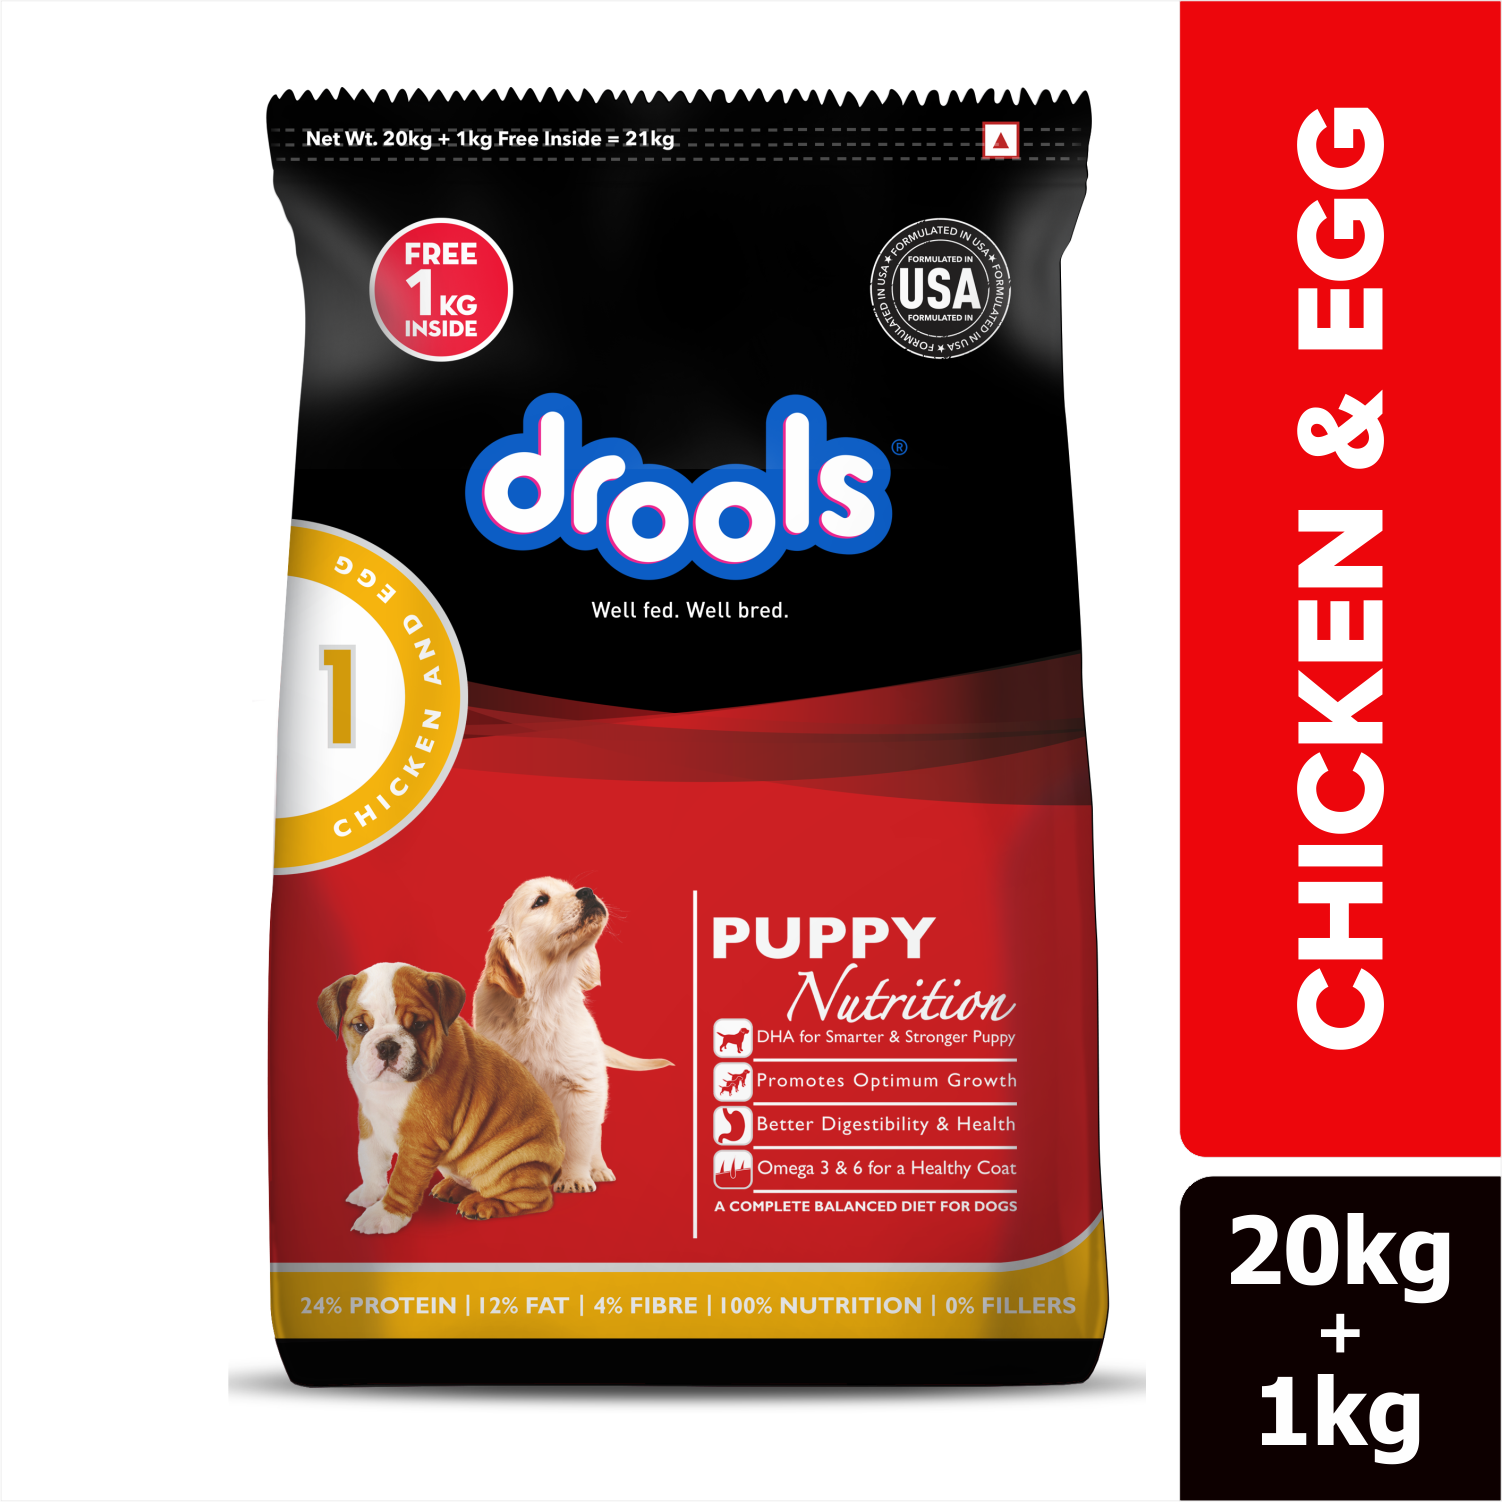 Drools Chicken and Egg Puppy Dog Dry Food